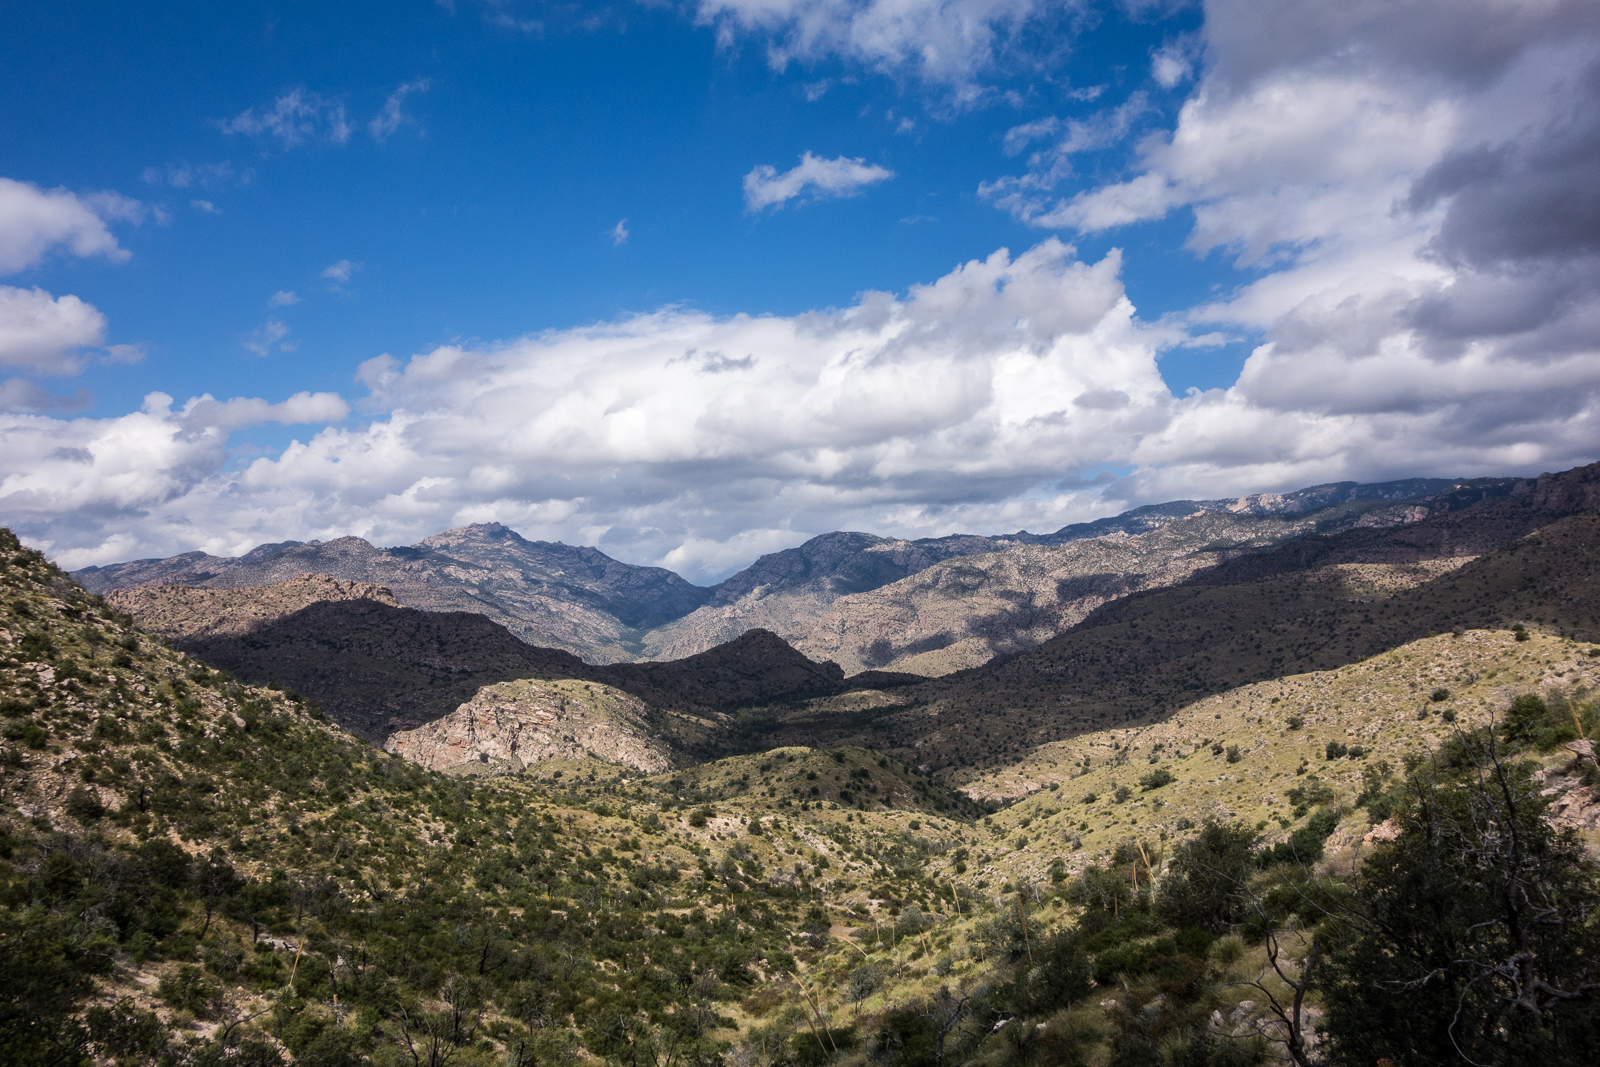 Looking across the Santa Catalina Mountains - from near Shreve Saddle, looking down on Sycamore Reservoir. October 2015.